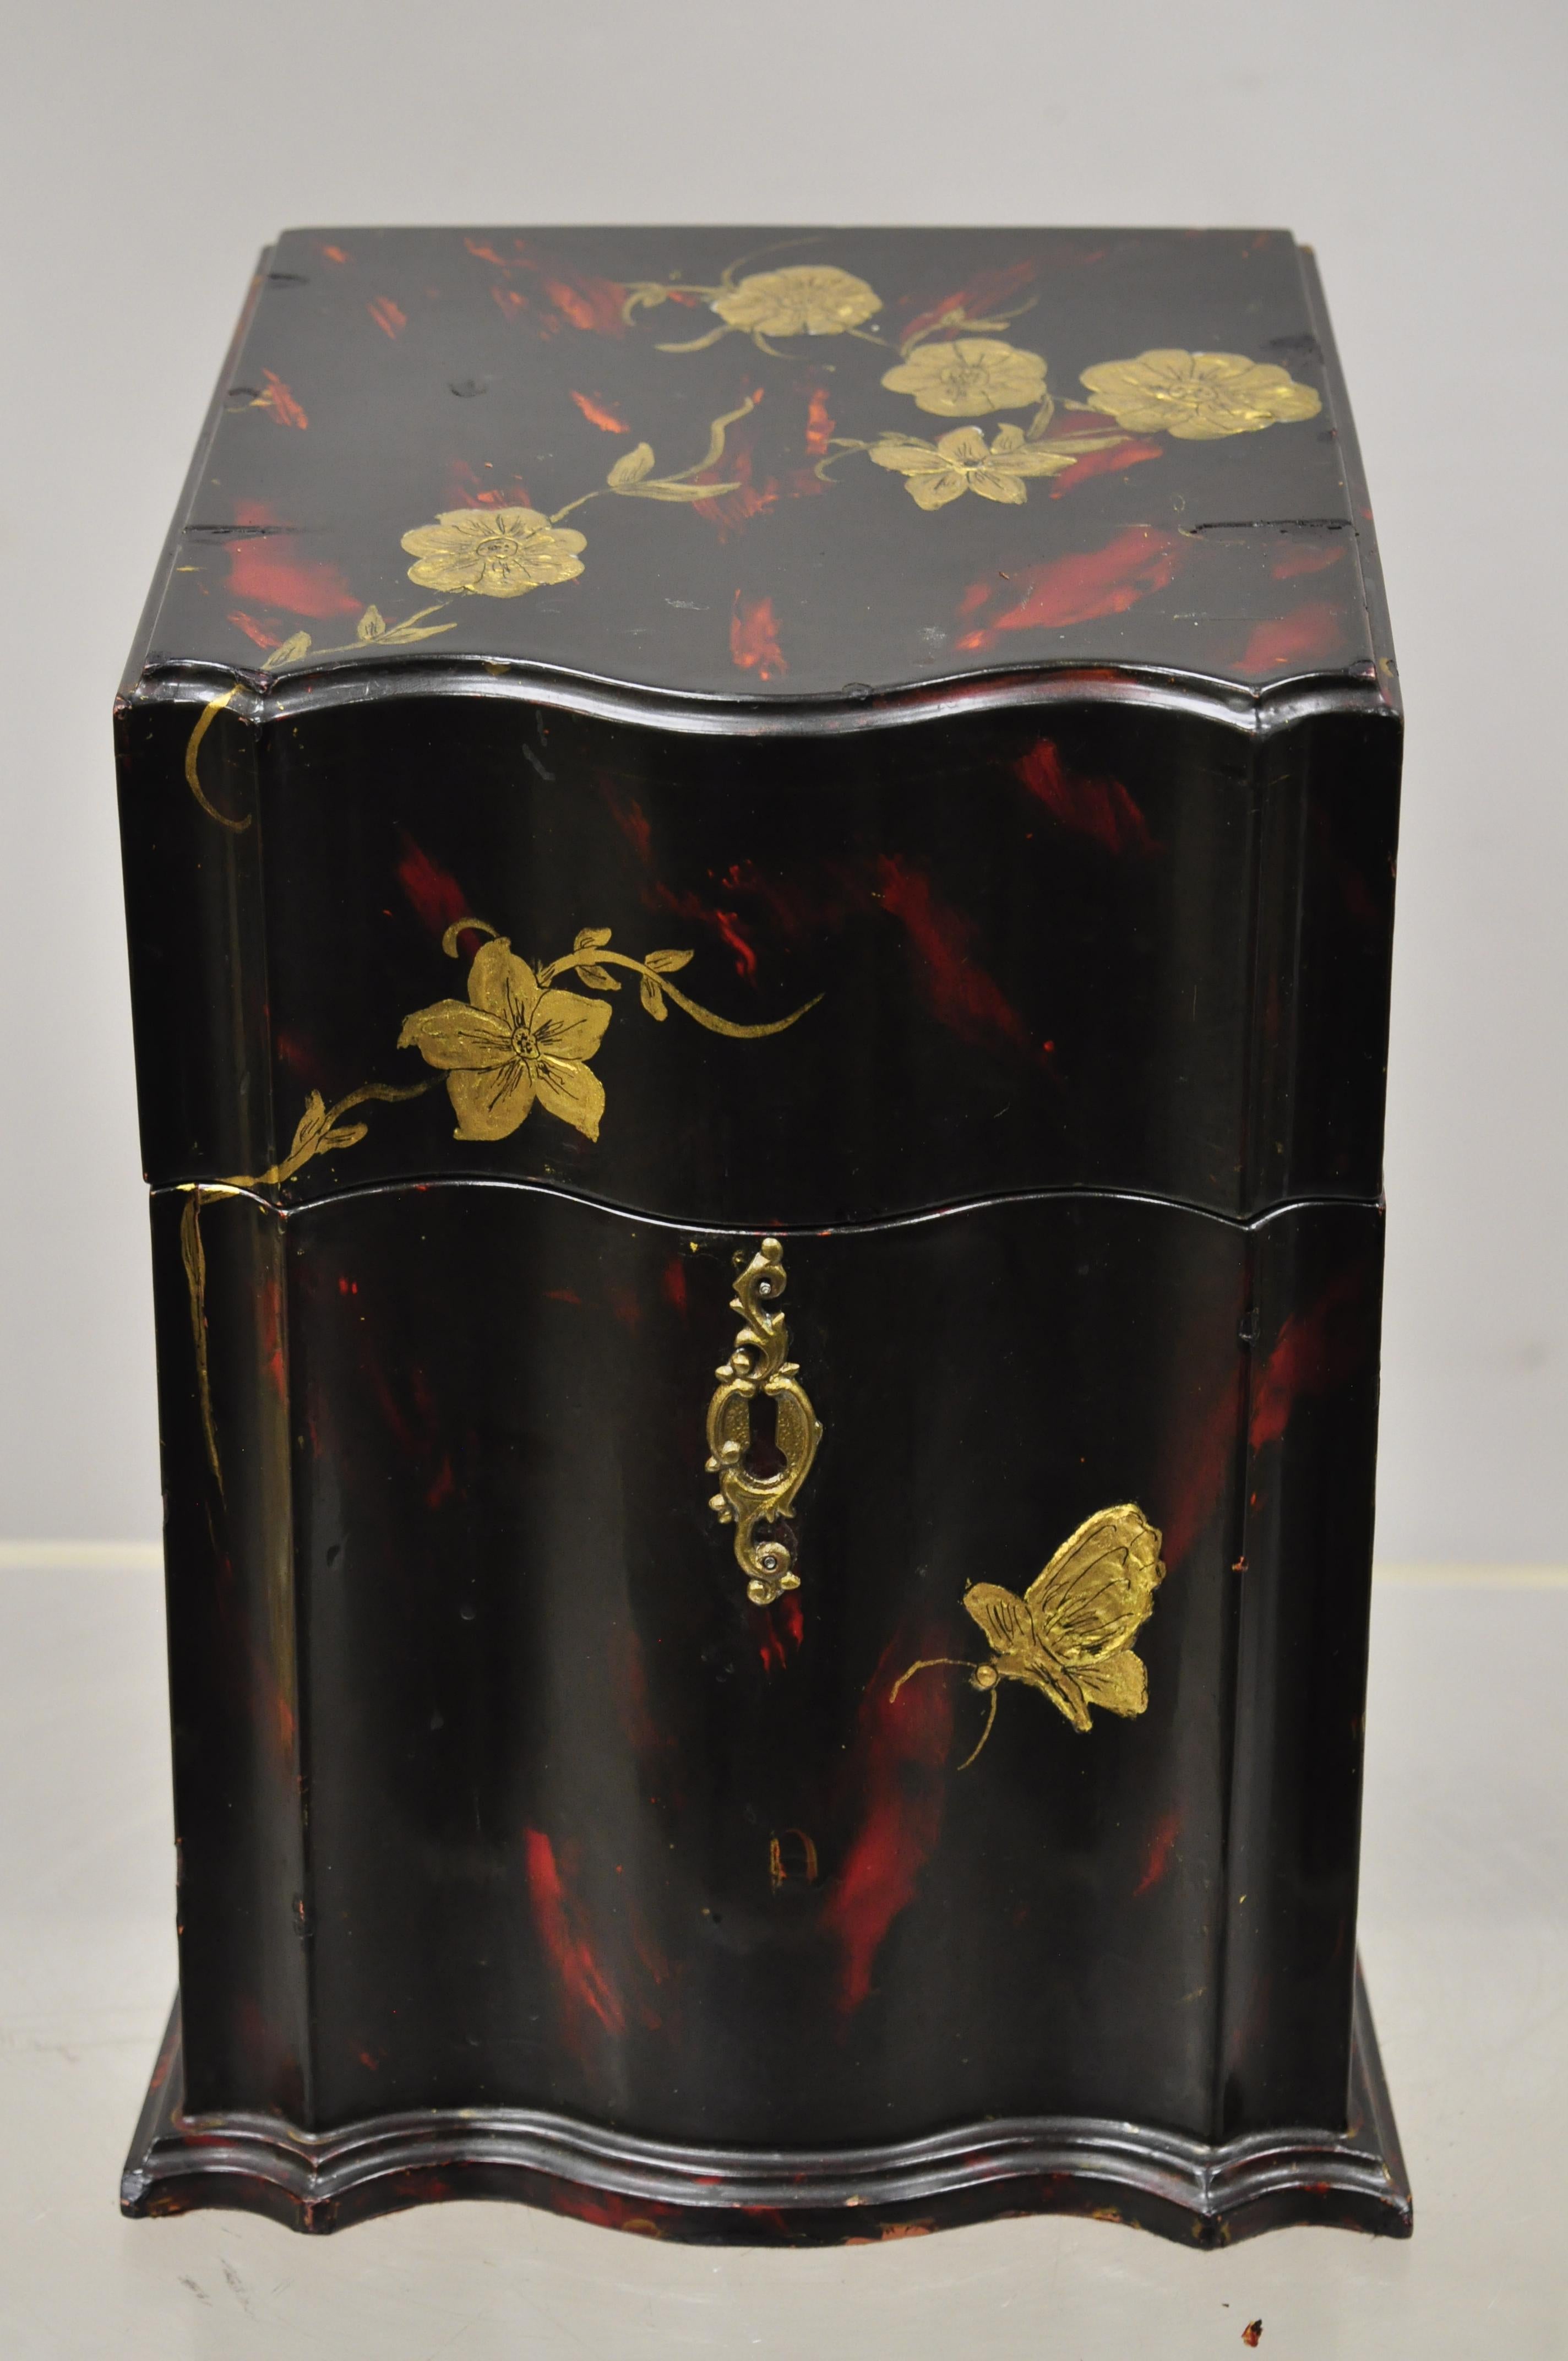 Vintage George III style lacquered wood hand painted butterfly flower knife box. Item features red lacquer painted finish, gold painted flowers, solid wood construction, very nice antique item, circa early 1900s. Measurements: 12.5